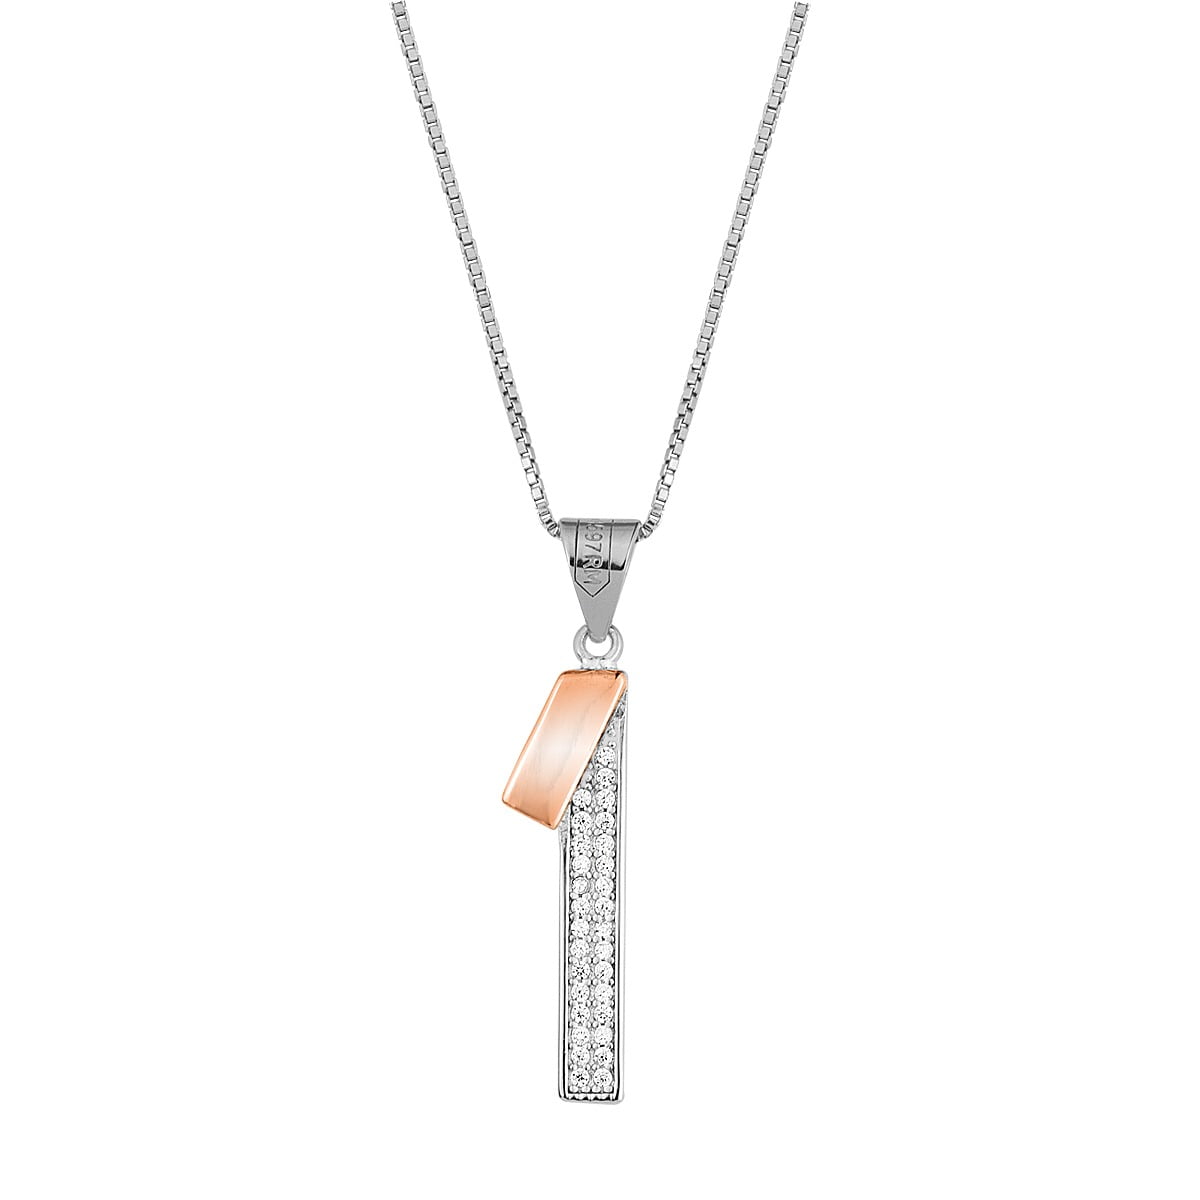 Pendant "Ribbon" parallelogram, in sterling silver 925°, with white zircons and rose gold plating. Accompanied by a 925° silver chain.